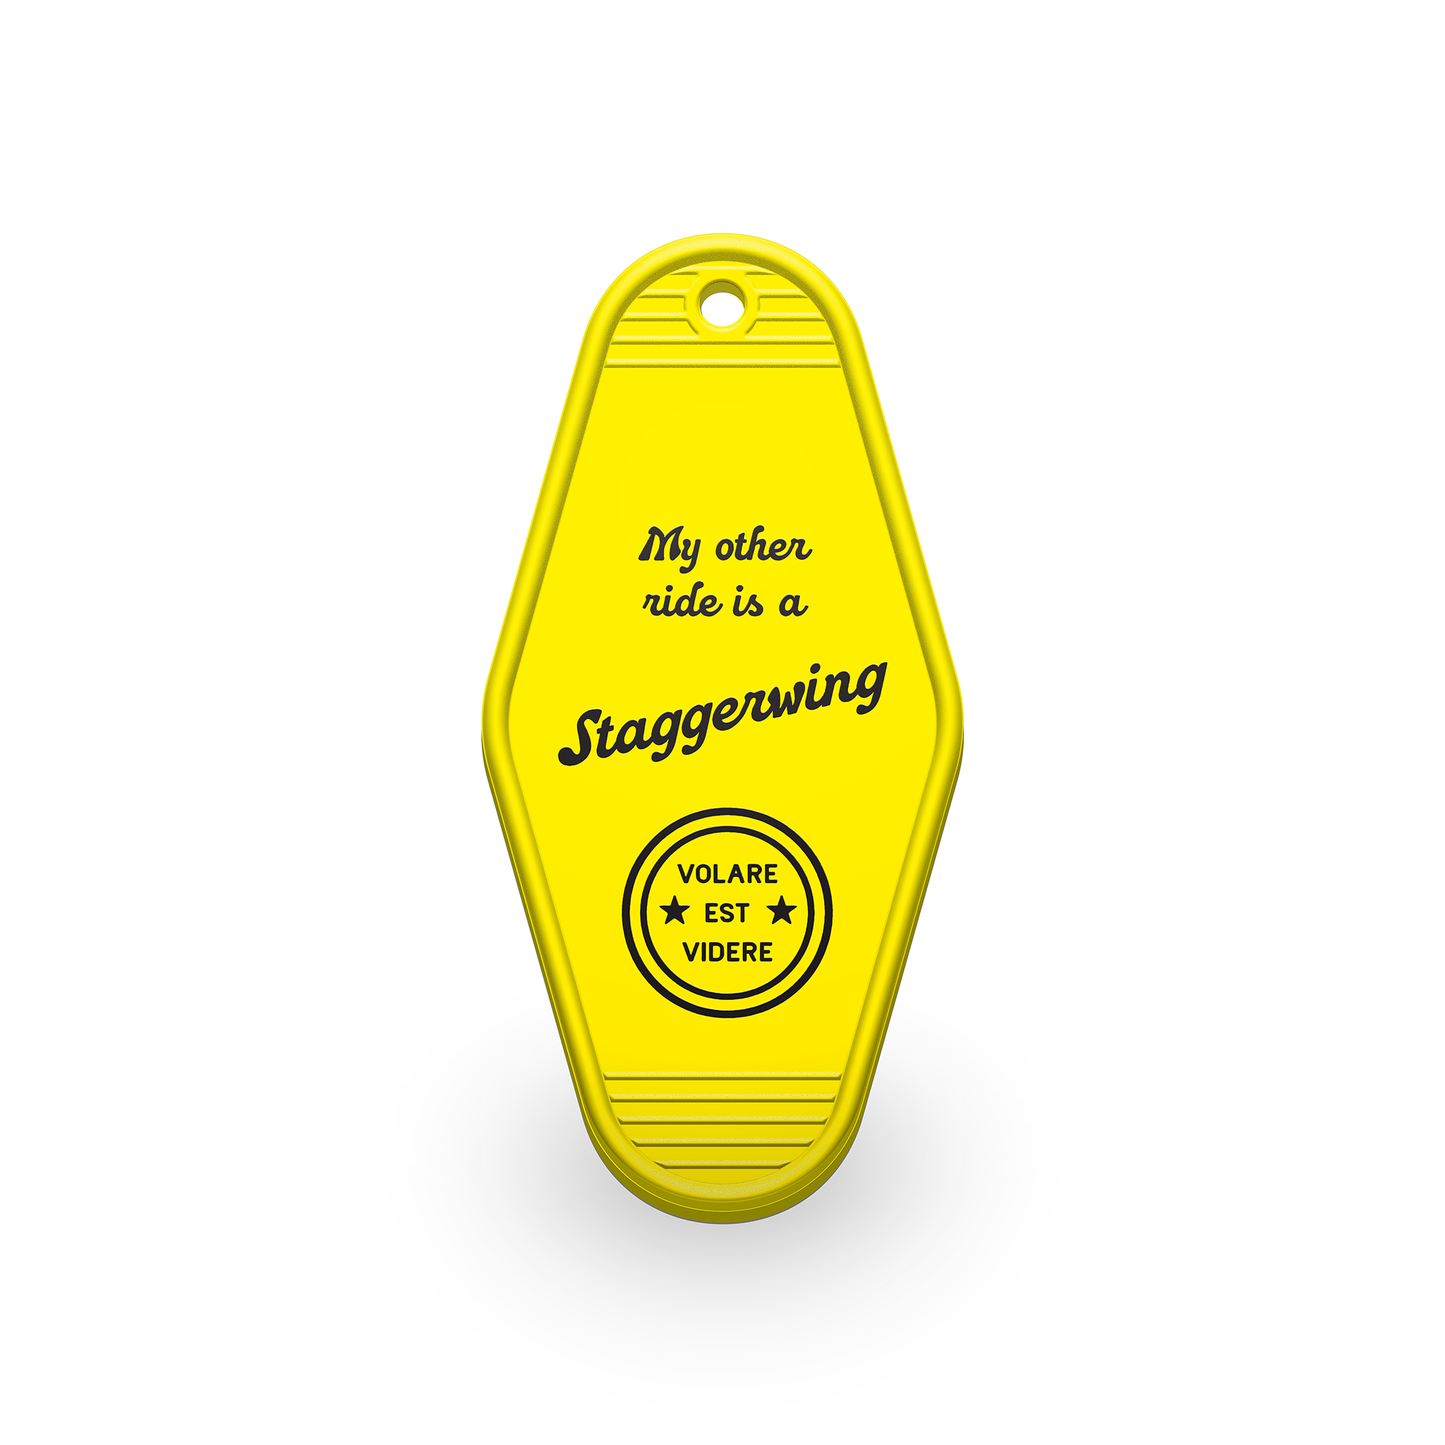 Staggerwing Key Tag